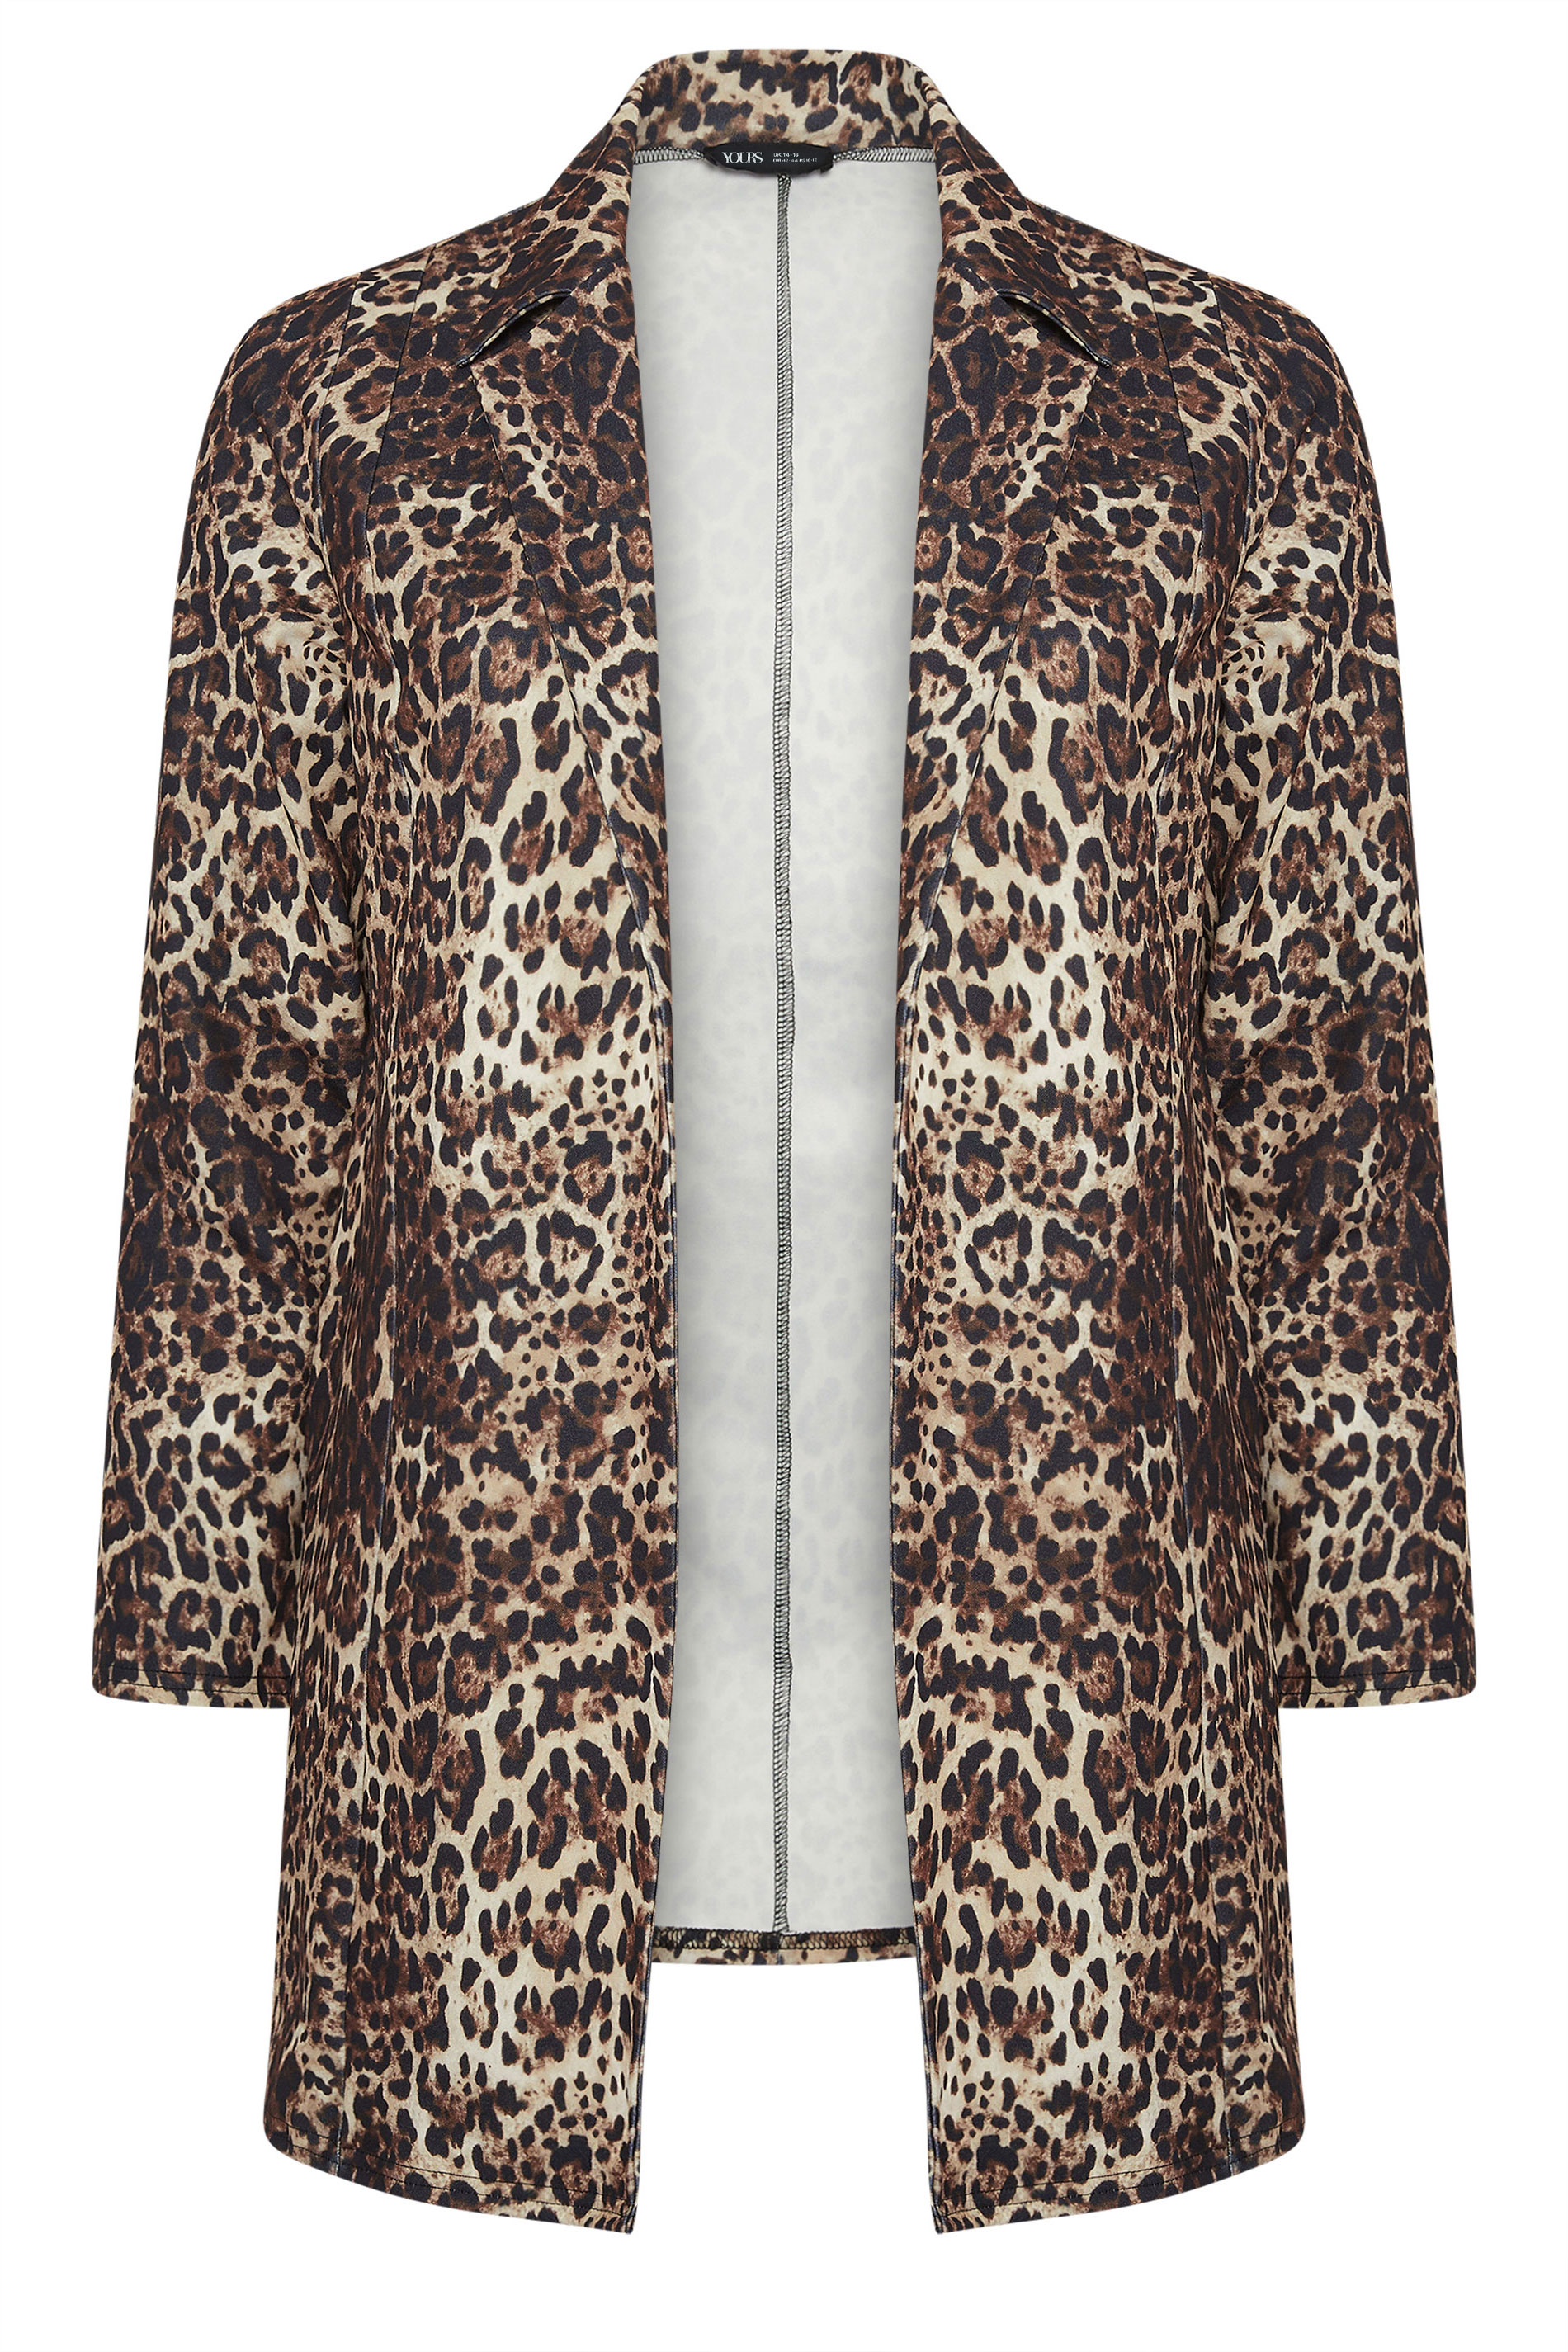 LIMITED COLLECTION Plus Size Brown Leopard Print Shirt